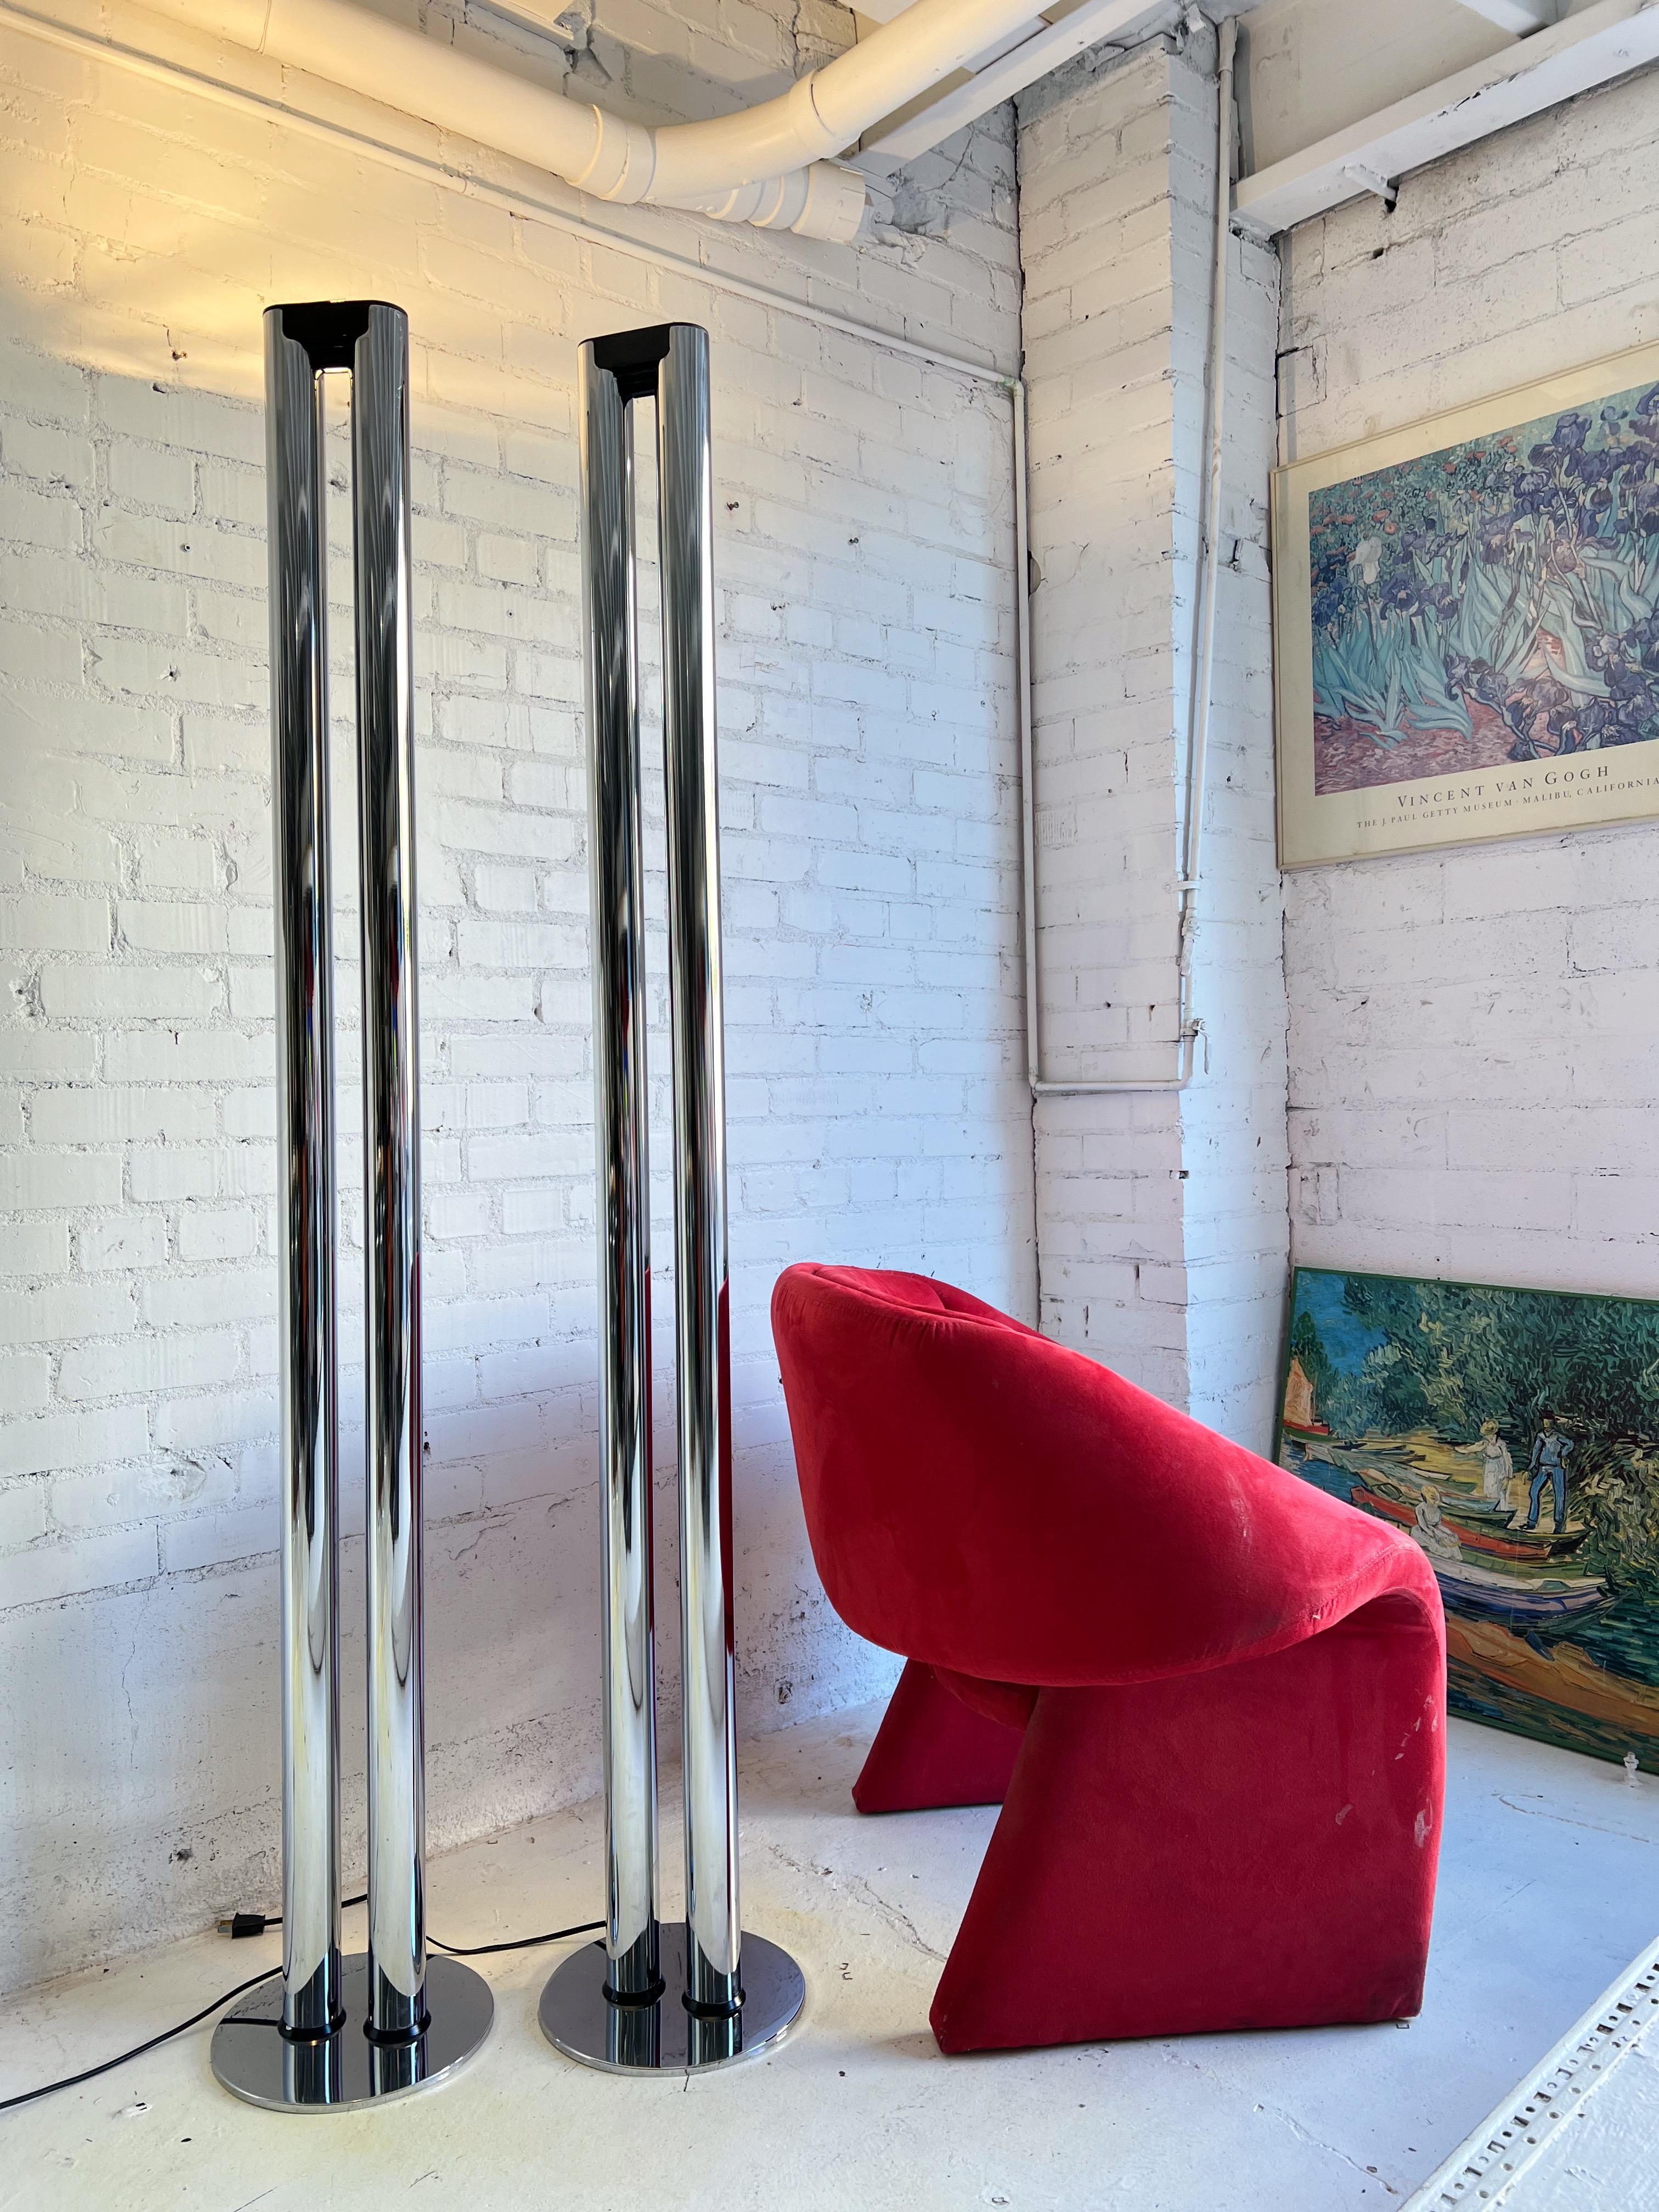 Chrome pillar double tube torchieres c. 1980’s. Simple and elegant design with a striking, harmonious presence. Provide balance to any vignette while adding warm, indirect light to your space.

Beautiful vintage condition, chrome is well preserved